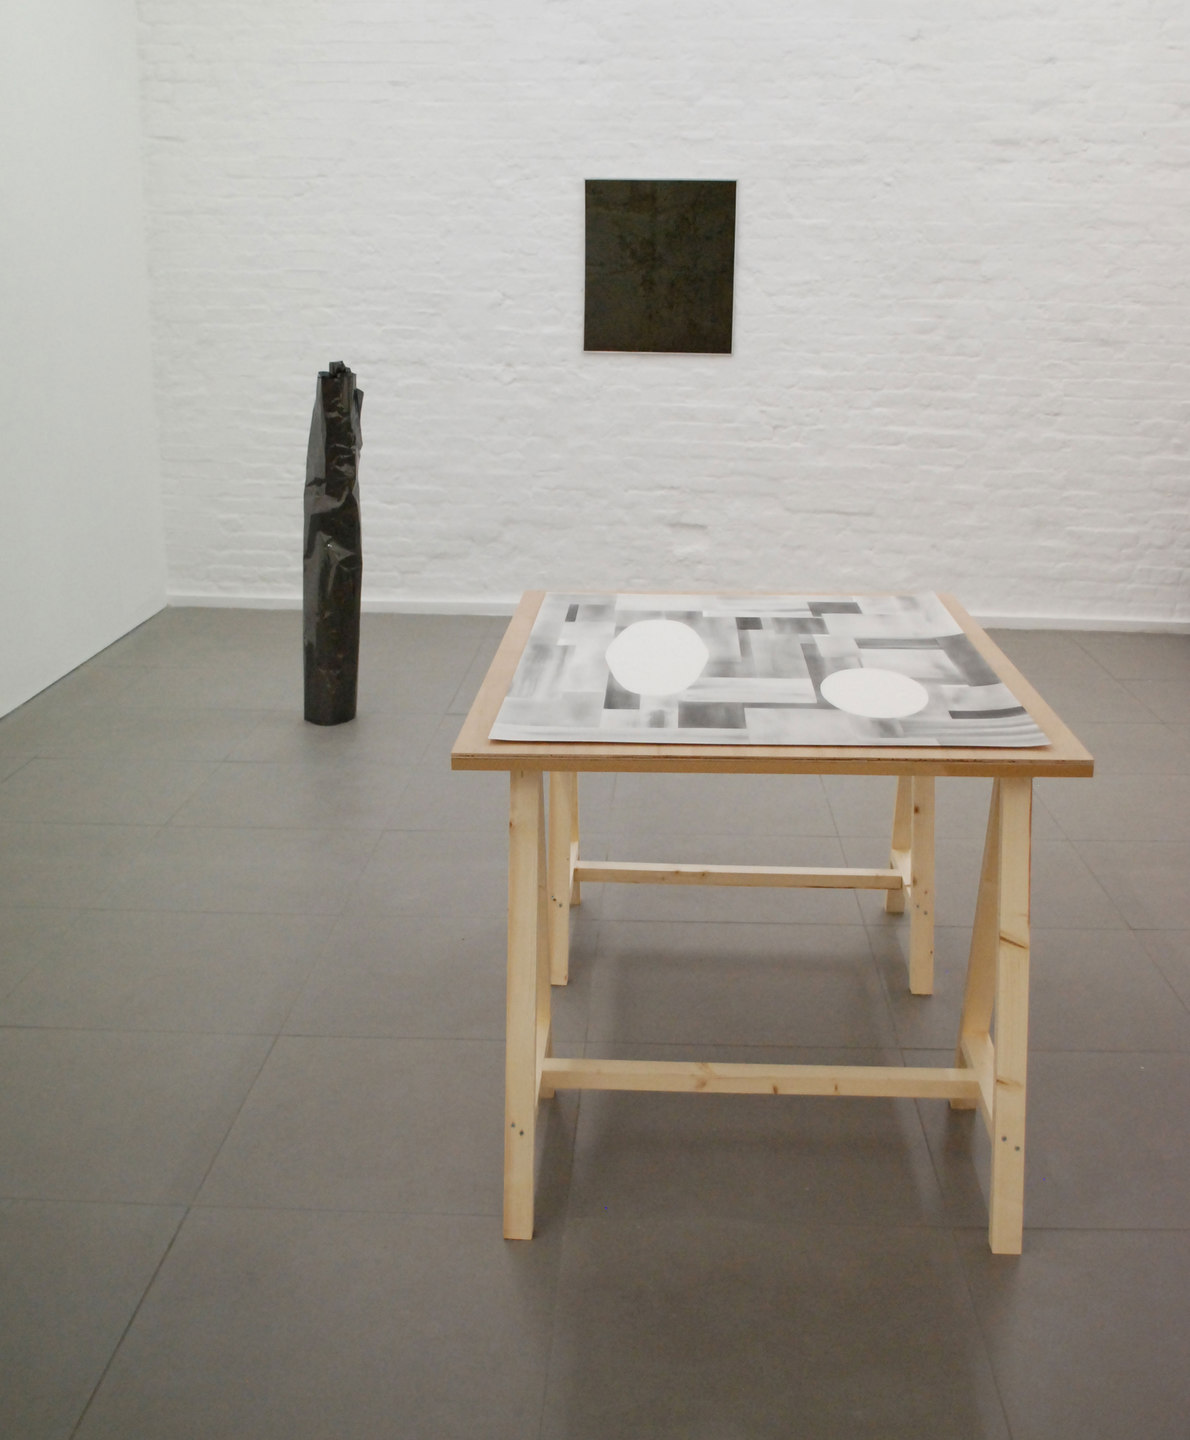 Maria Taniguchi ‘Untitled (Mirrors)’ 2010, graphite drawing on paper, table (l.1400mm x w.940mm x h.770mm), Cell Project Space